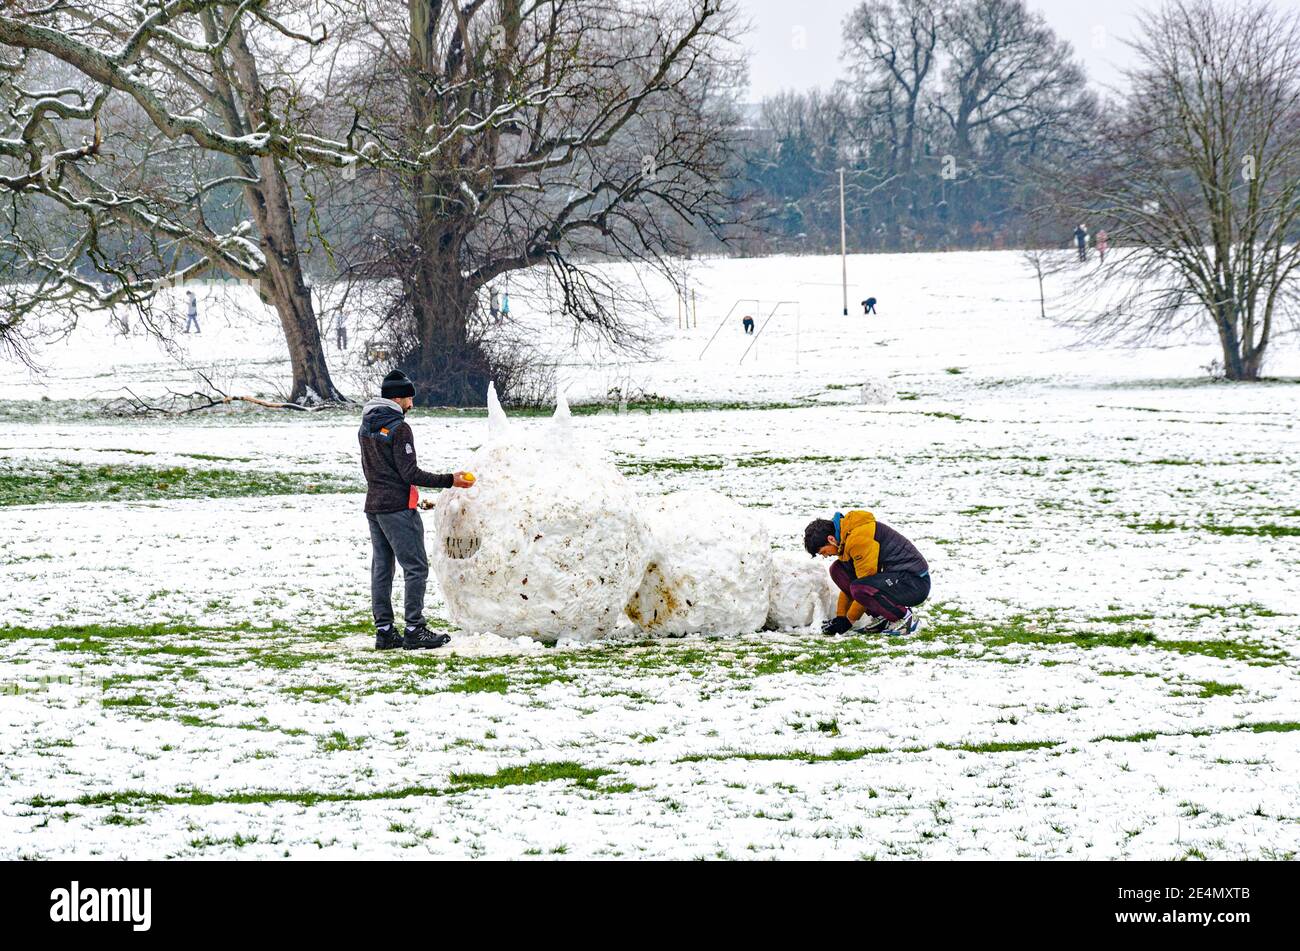 A couple of men have fun making a large caterpillar like creature, sculpted out of snow in Prospect Park, Reading, UK in the middle of winter. Stock Photo